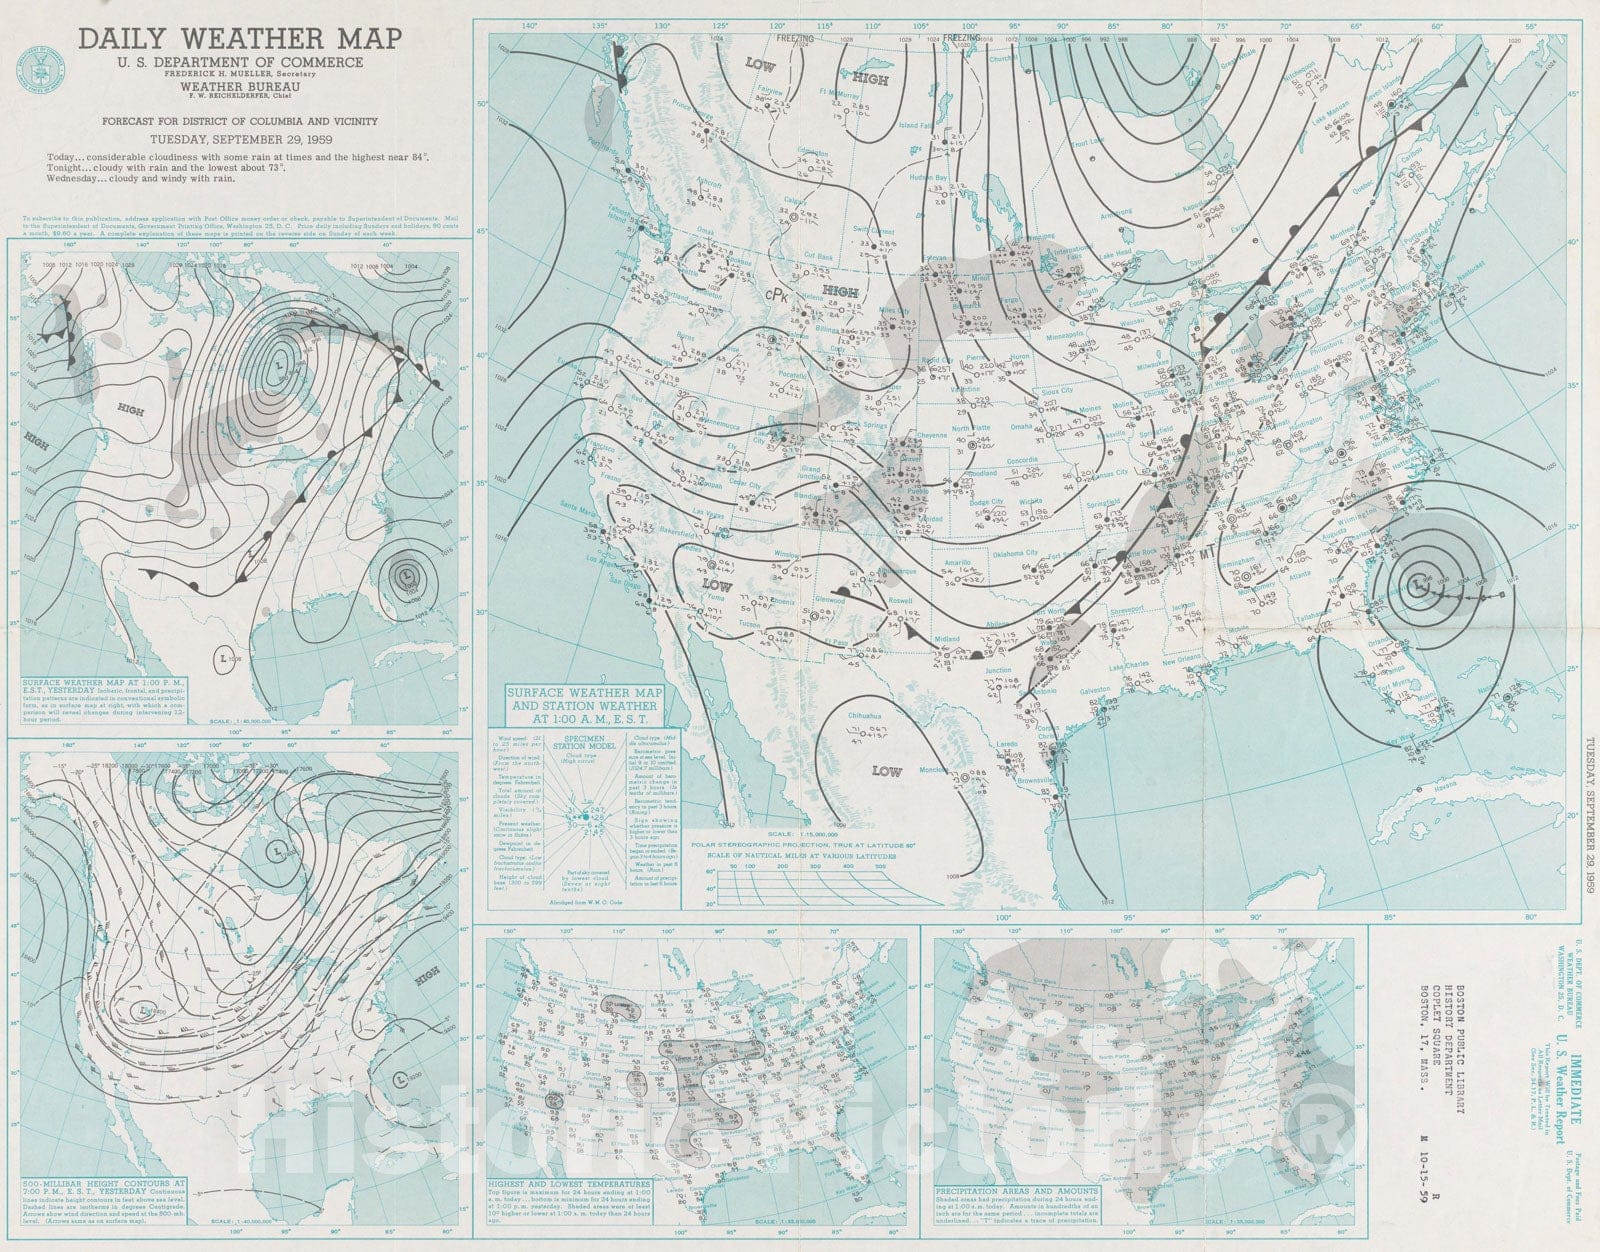 Historical Map, Daily Weather map : Tuesday, September 29, 1959, Vintage Wall Art